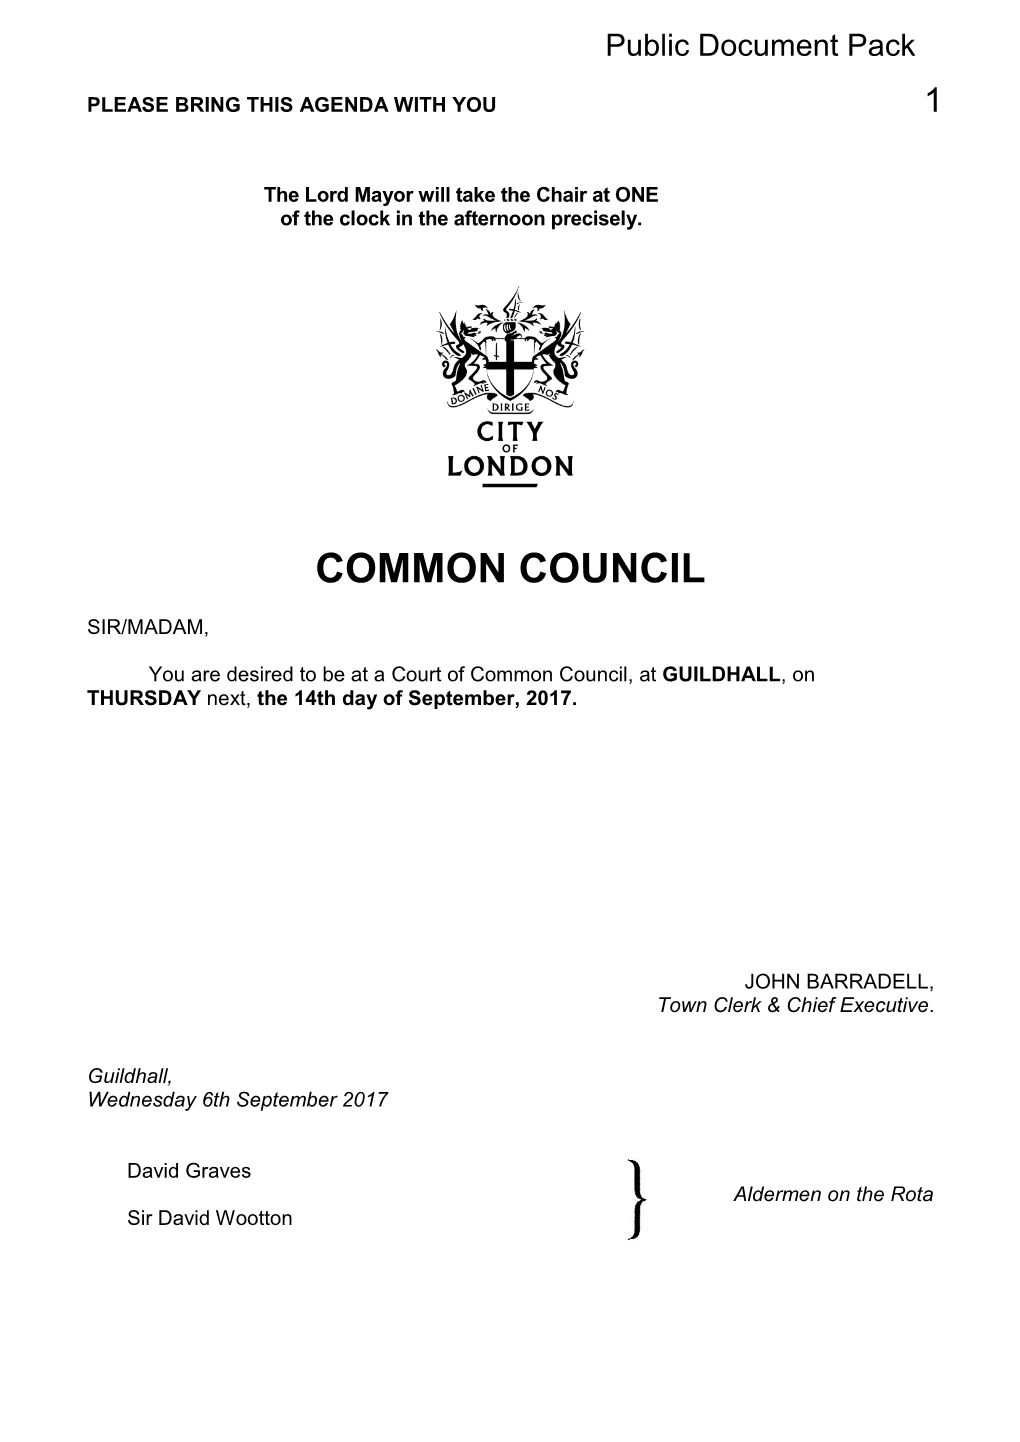 (Public Pack)Agenda Document for Court of Common Council, 14/09